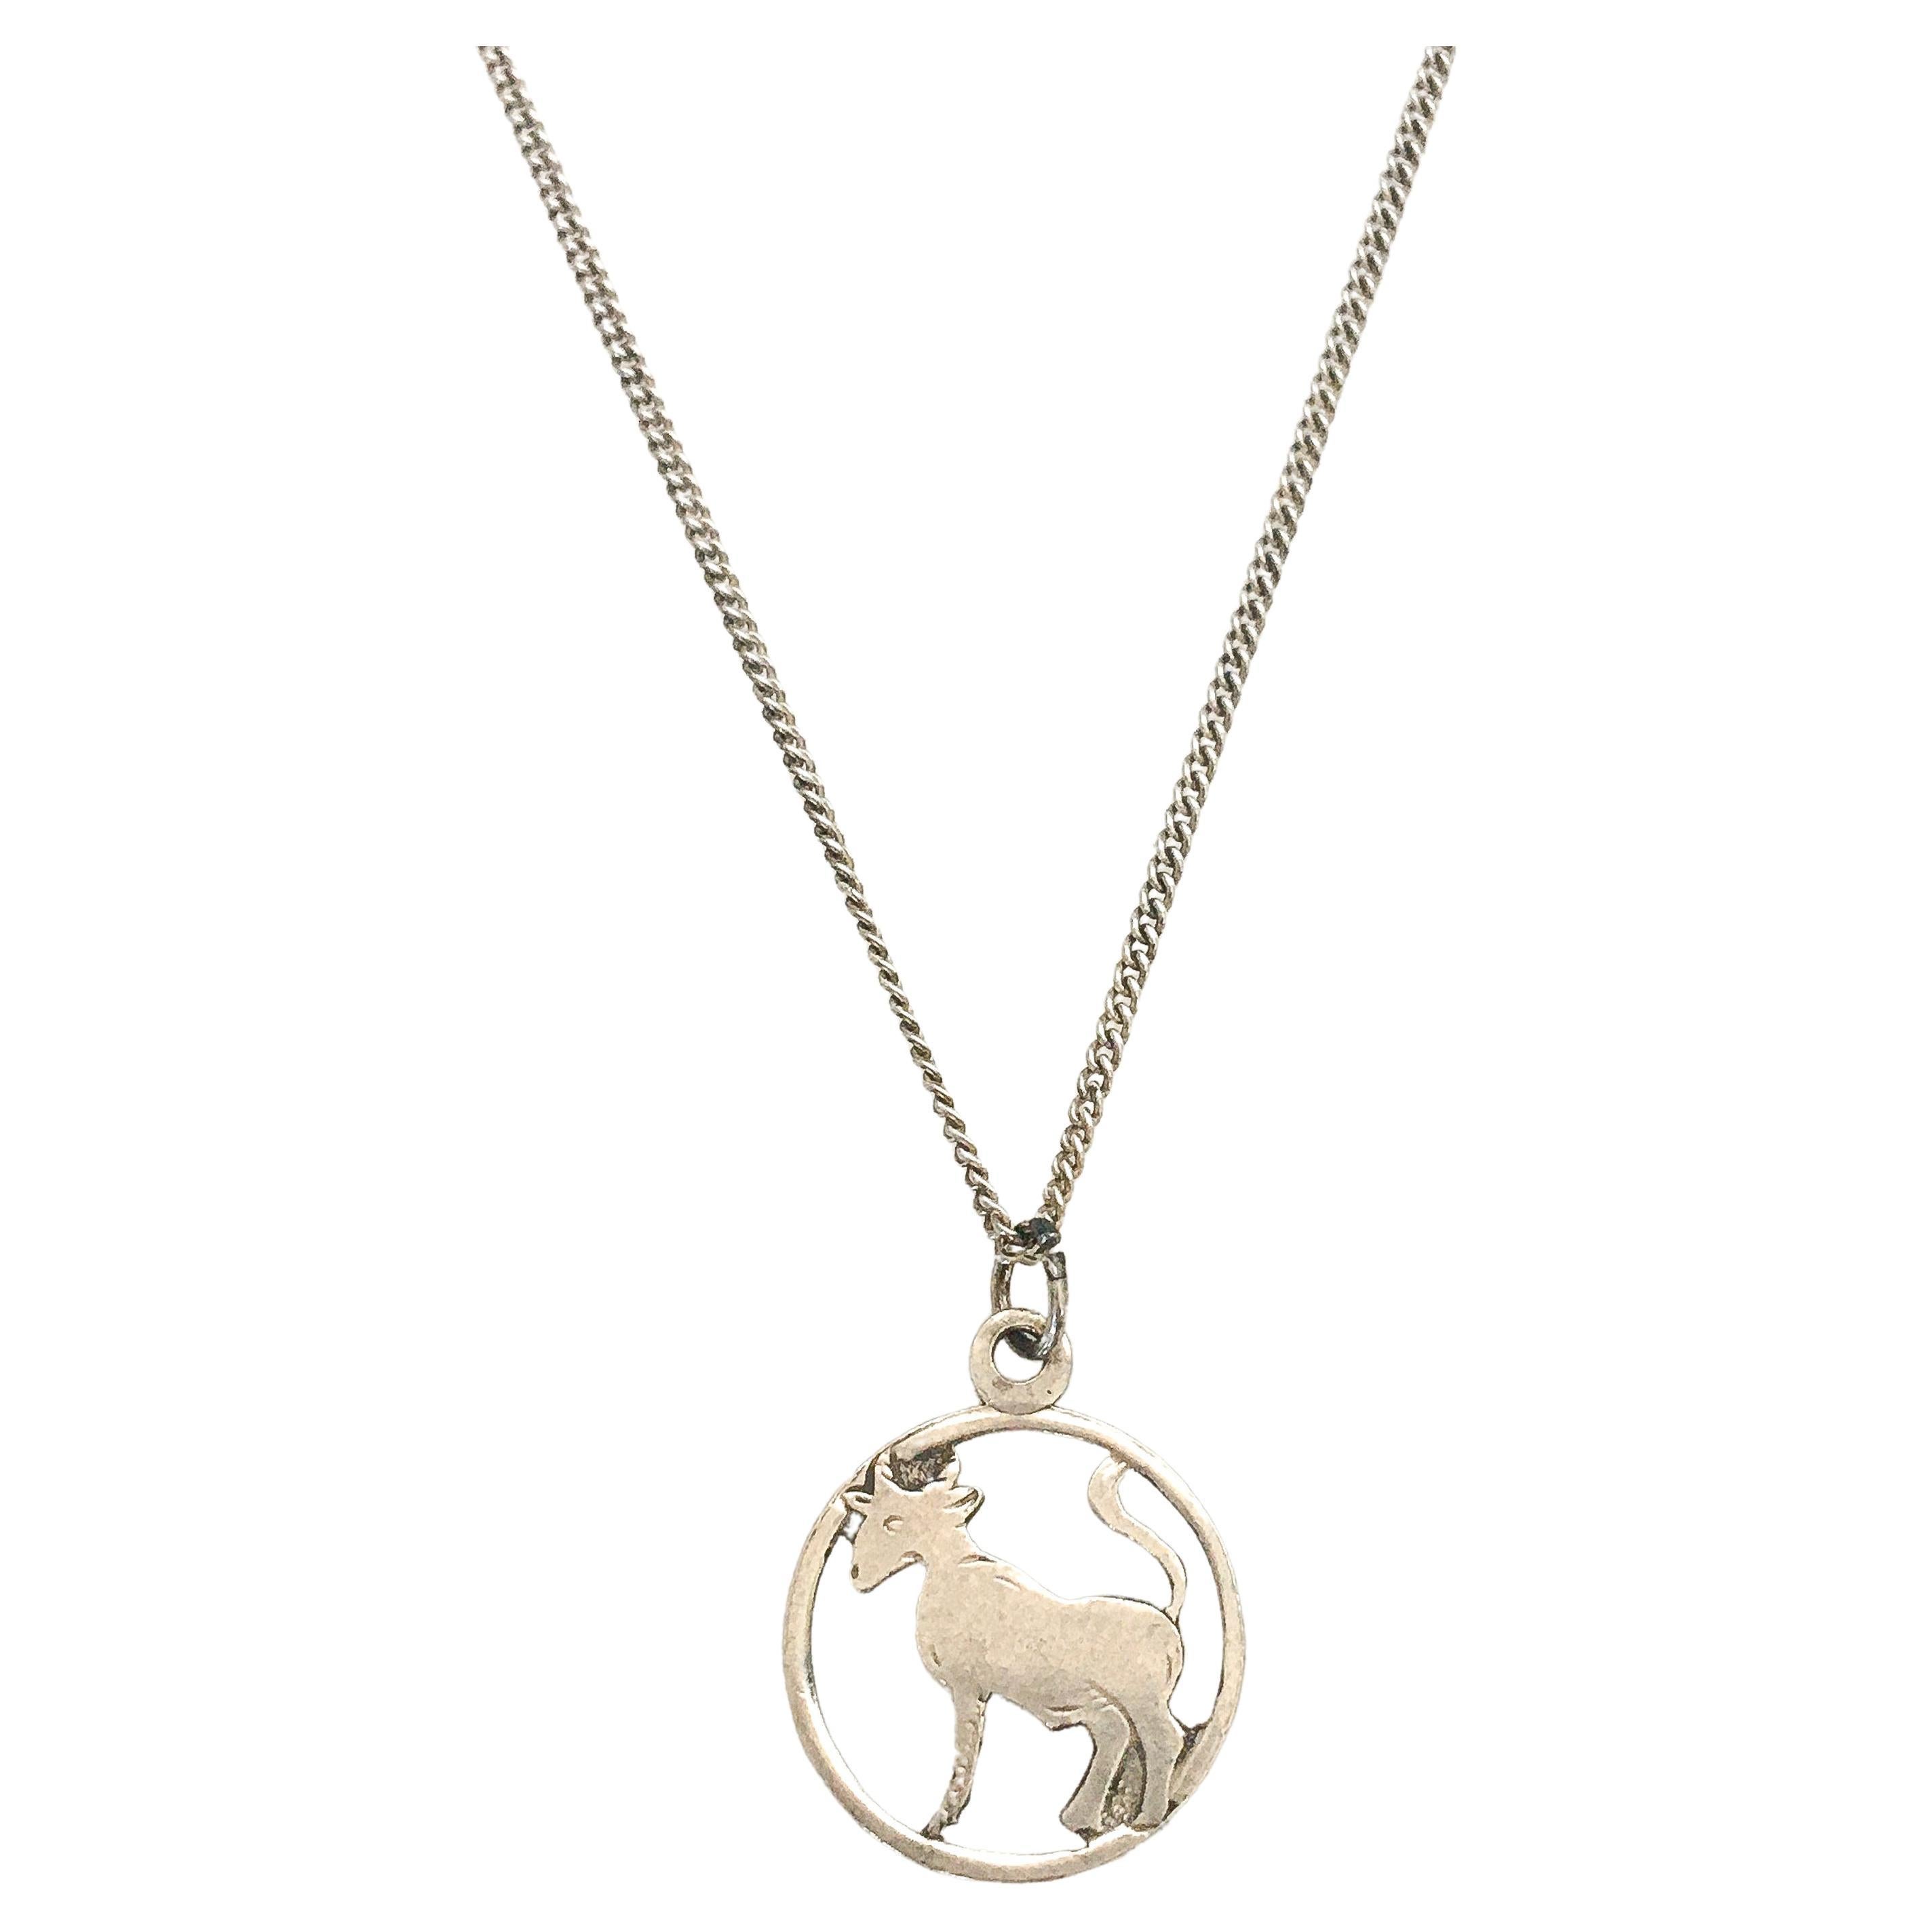 A vintage Capricorn zodiac silver charm pendant. The Capricorn shows beautiful details. The charm can be worn as an addition to your charms bracelet or alone as a pendant on a necklace chain. The charm comes without the necklace.

Collect your own